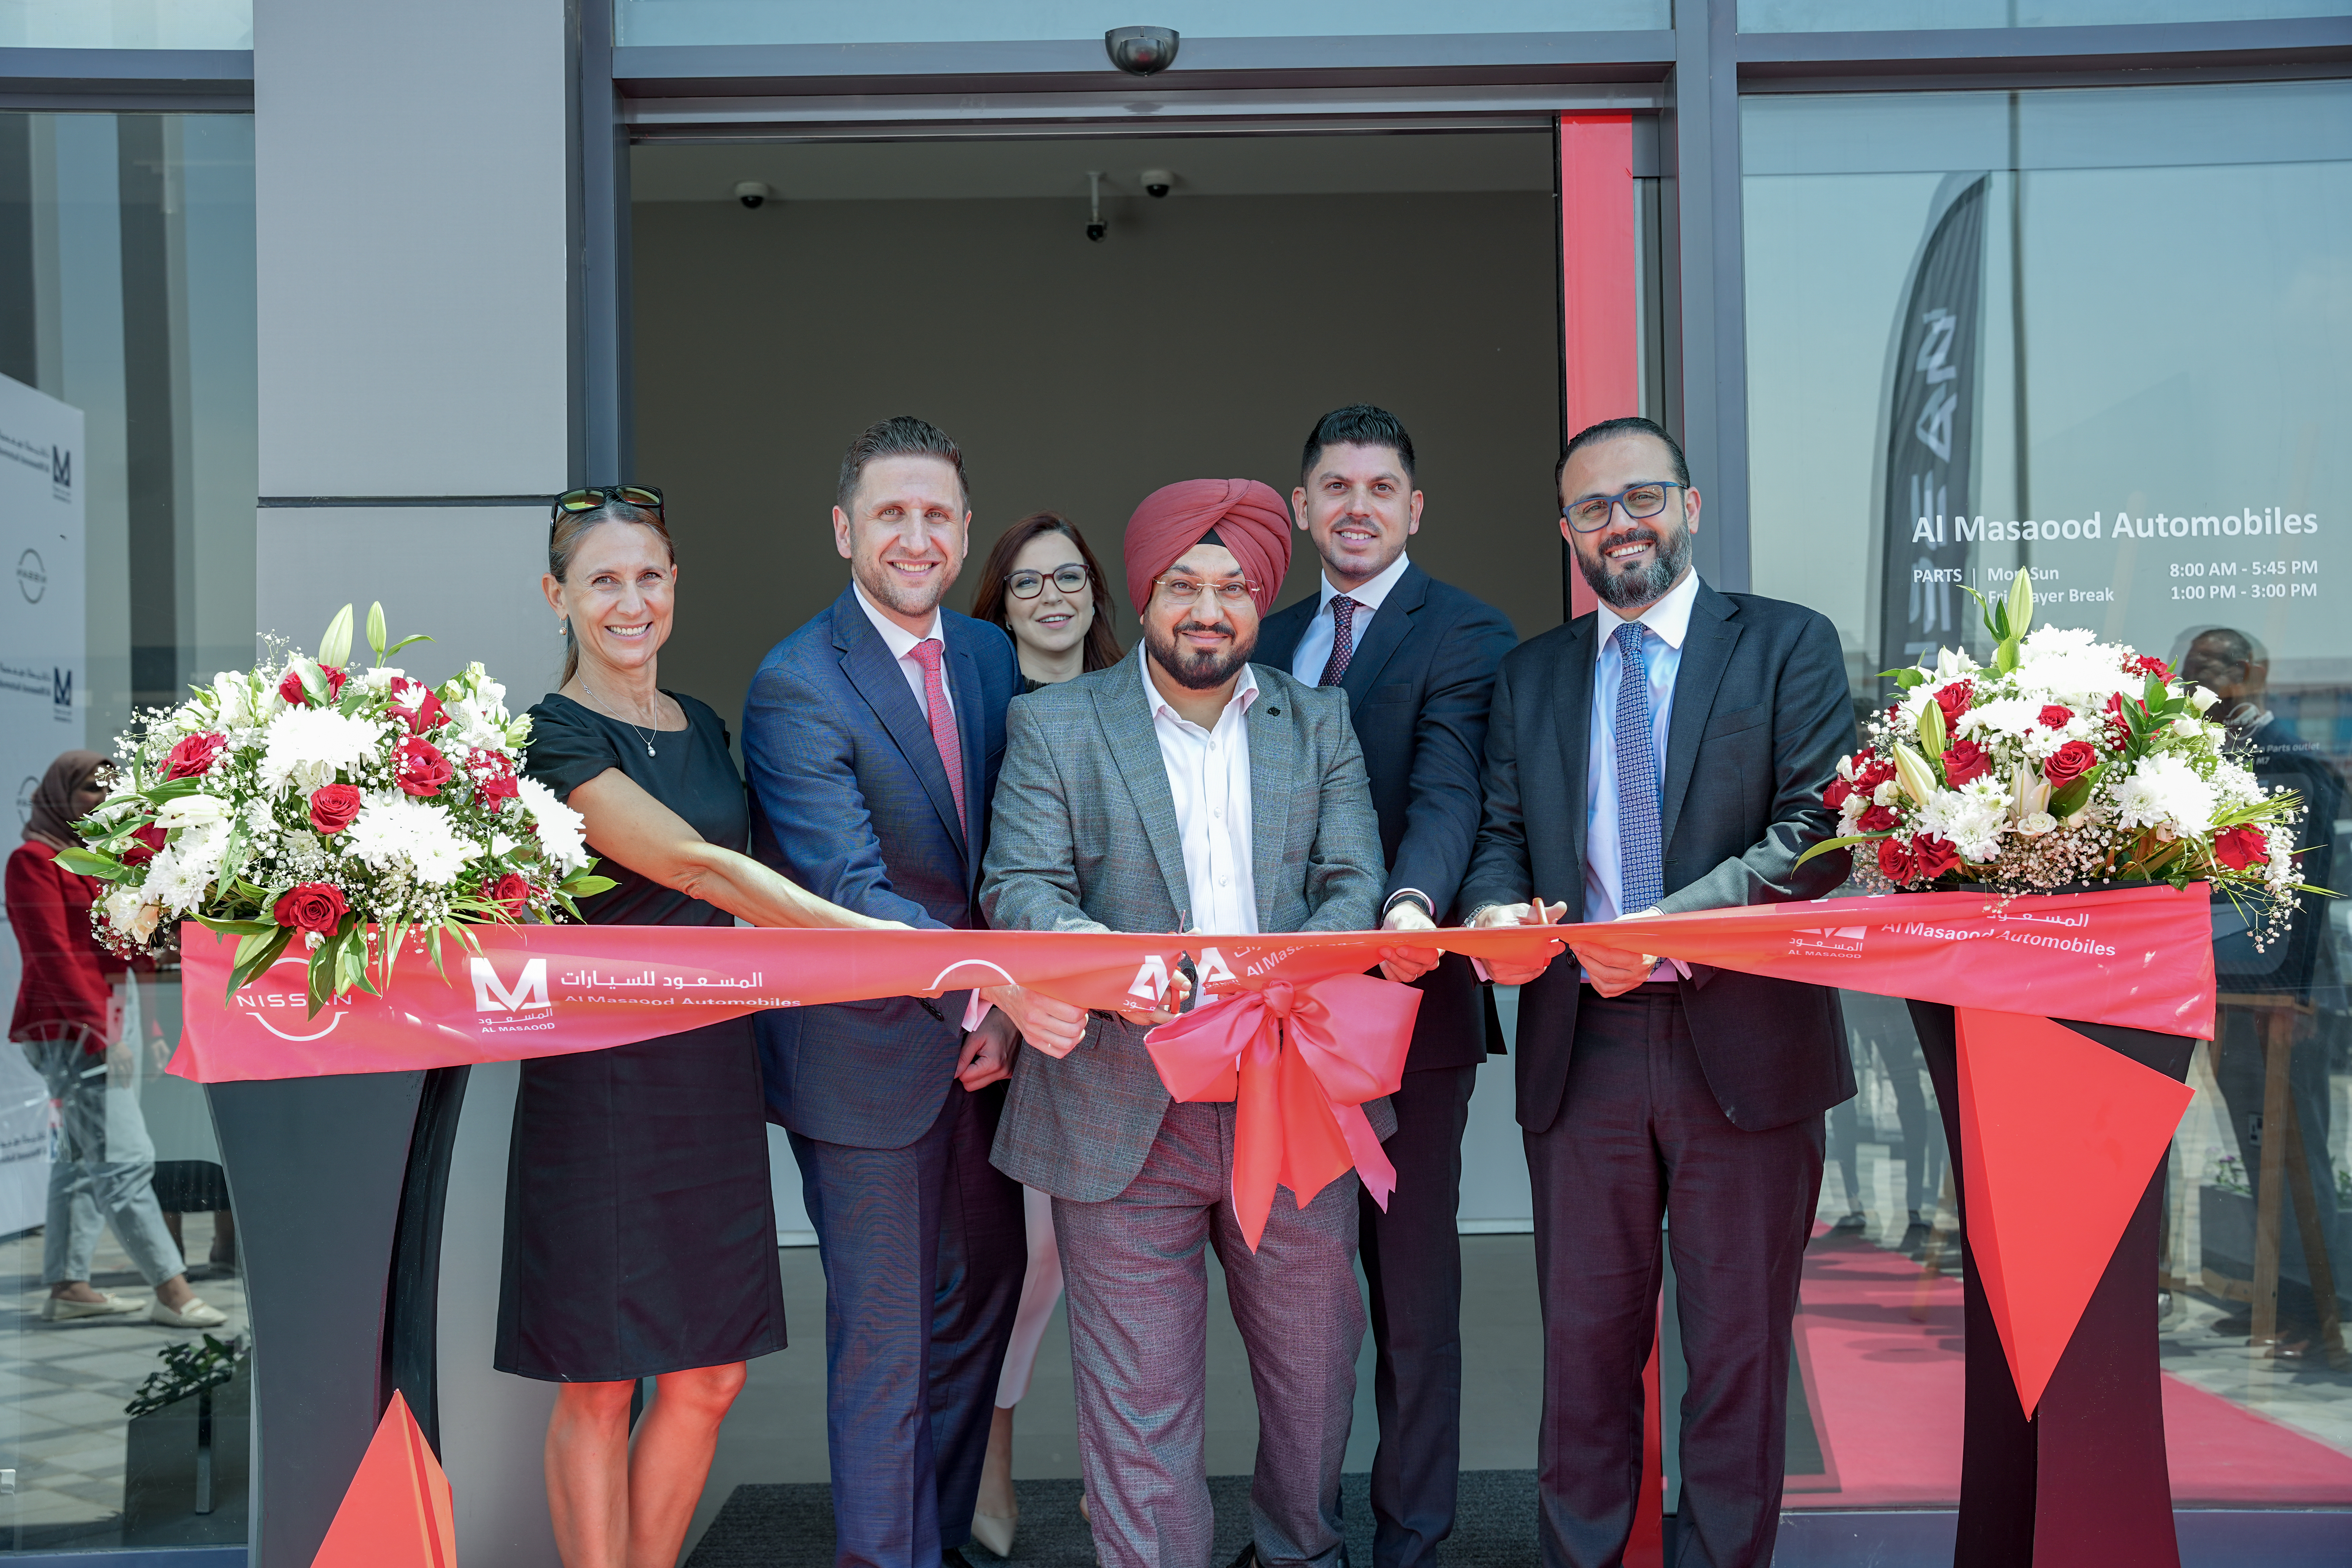  Al Masaood Automobiles Celebrates Grand Opening of Newly-Renovated Nissan Parts Centre